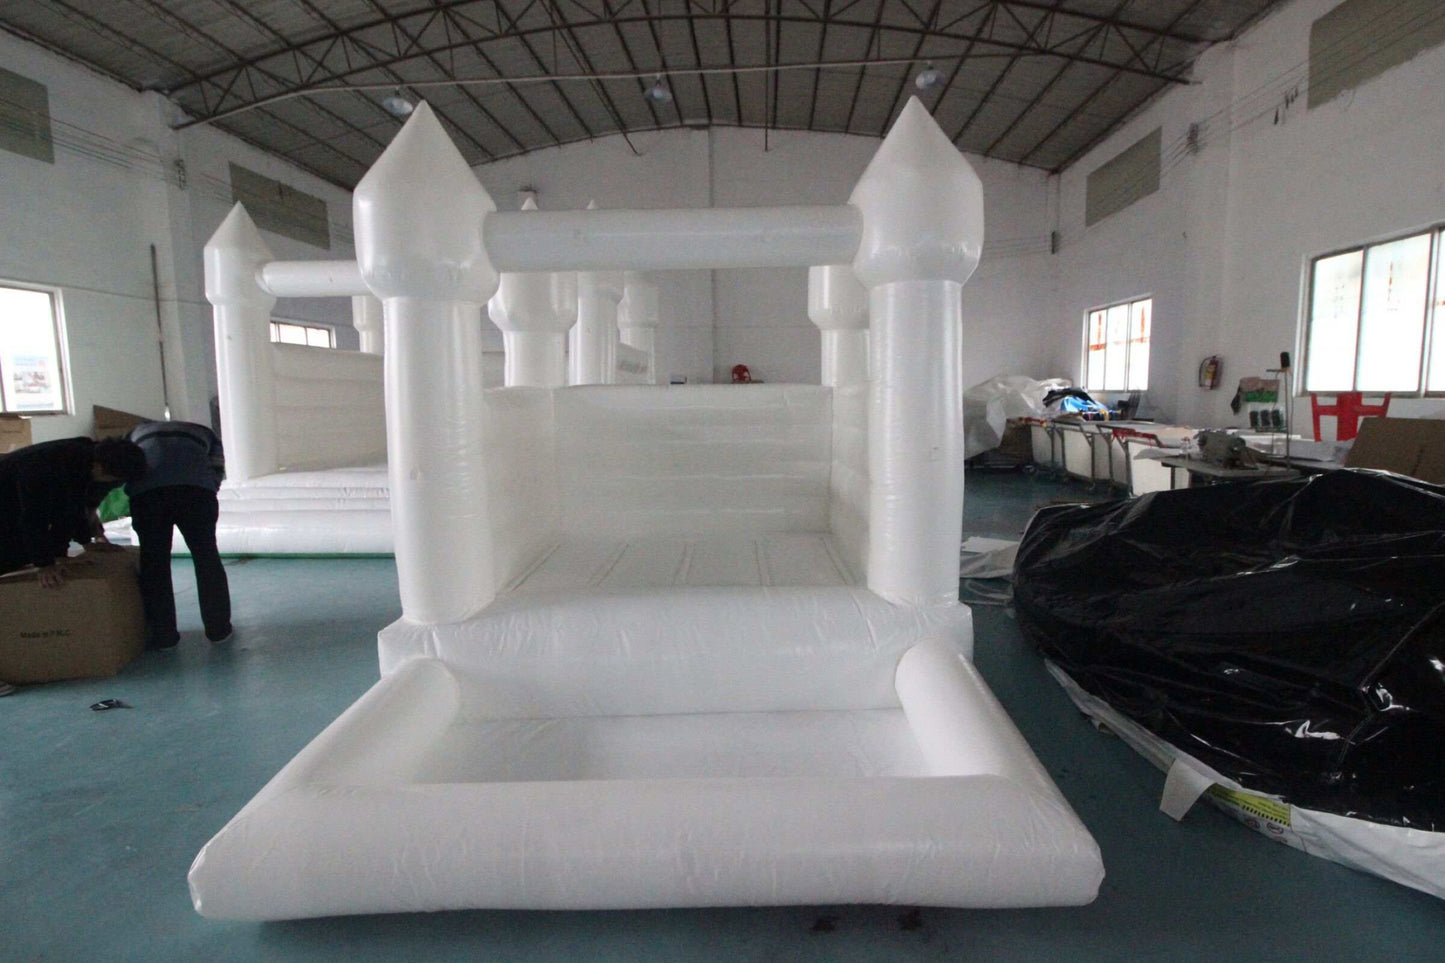 Children’s Bouncy Castle with Ball Pit